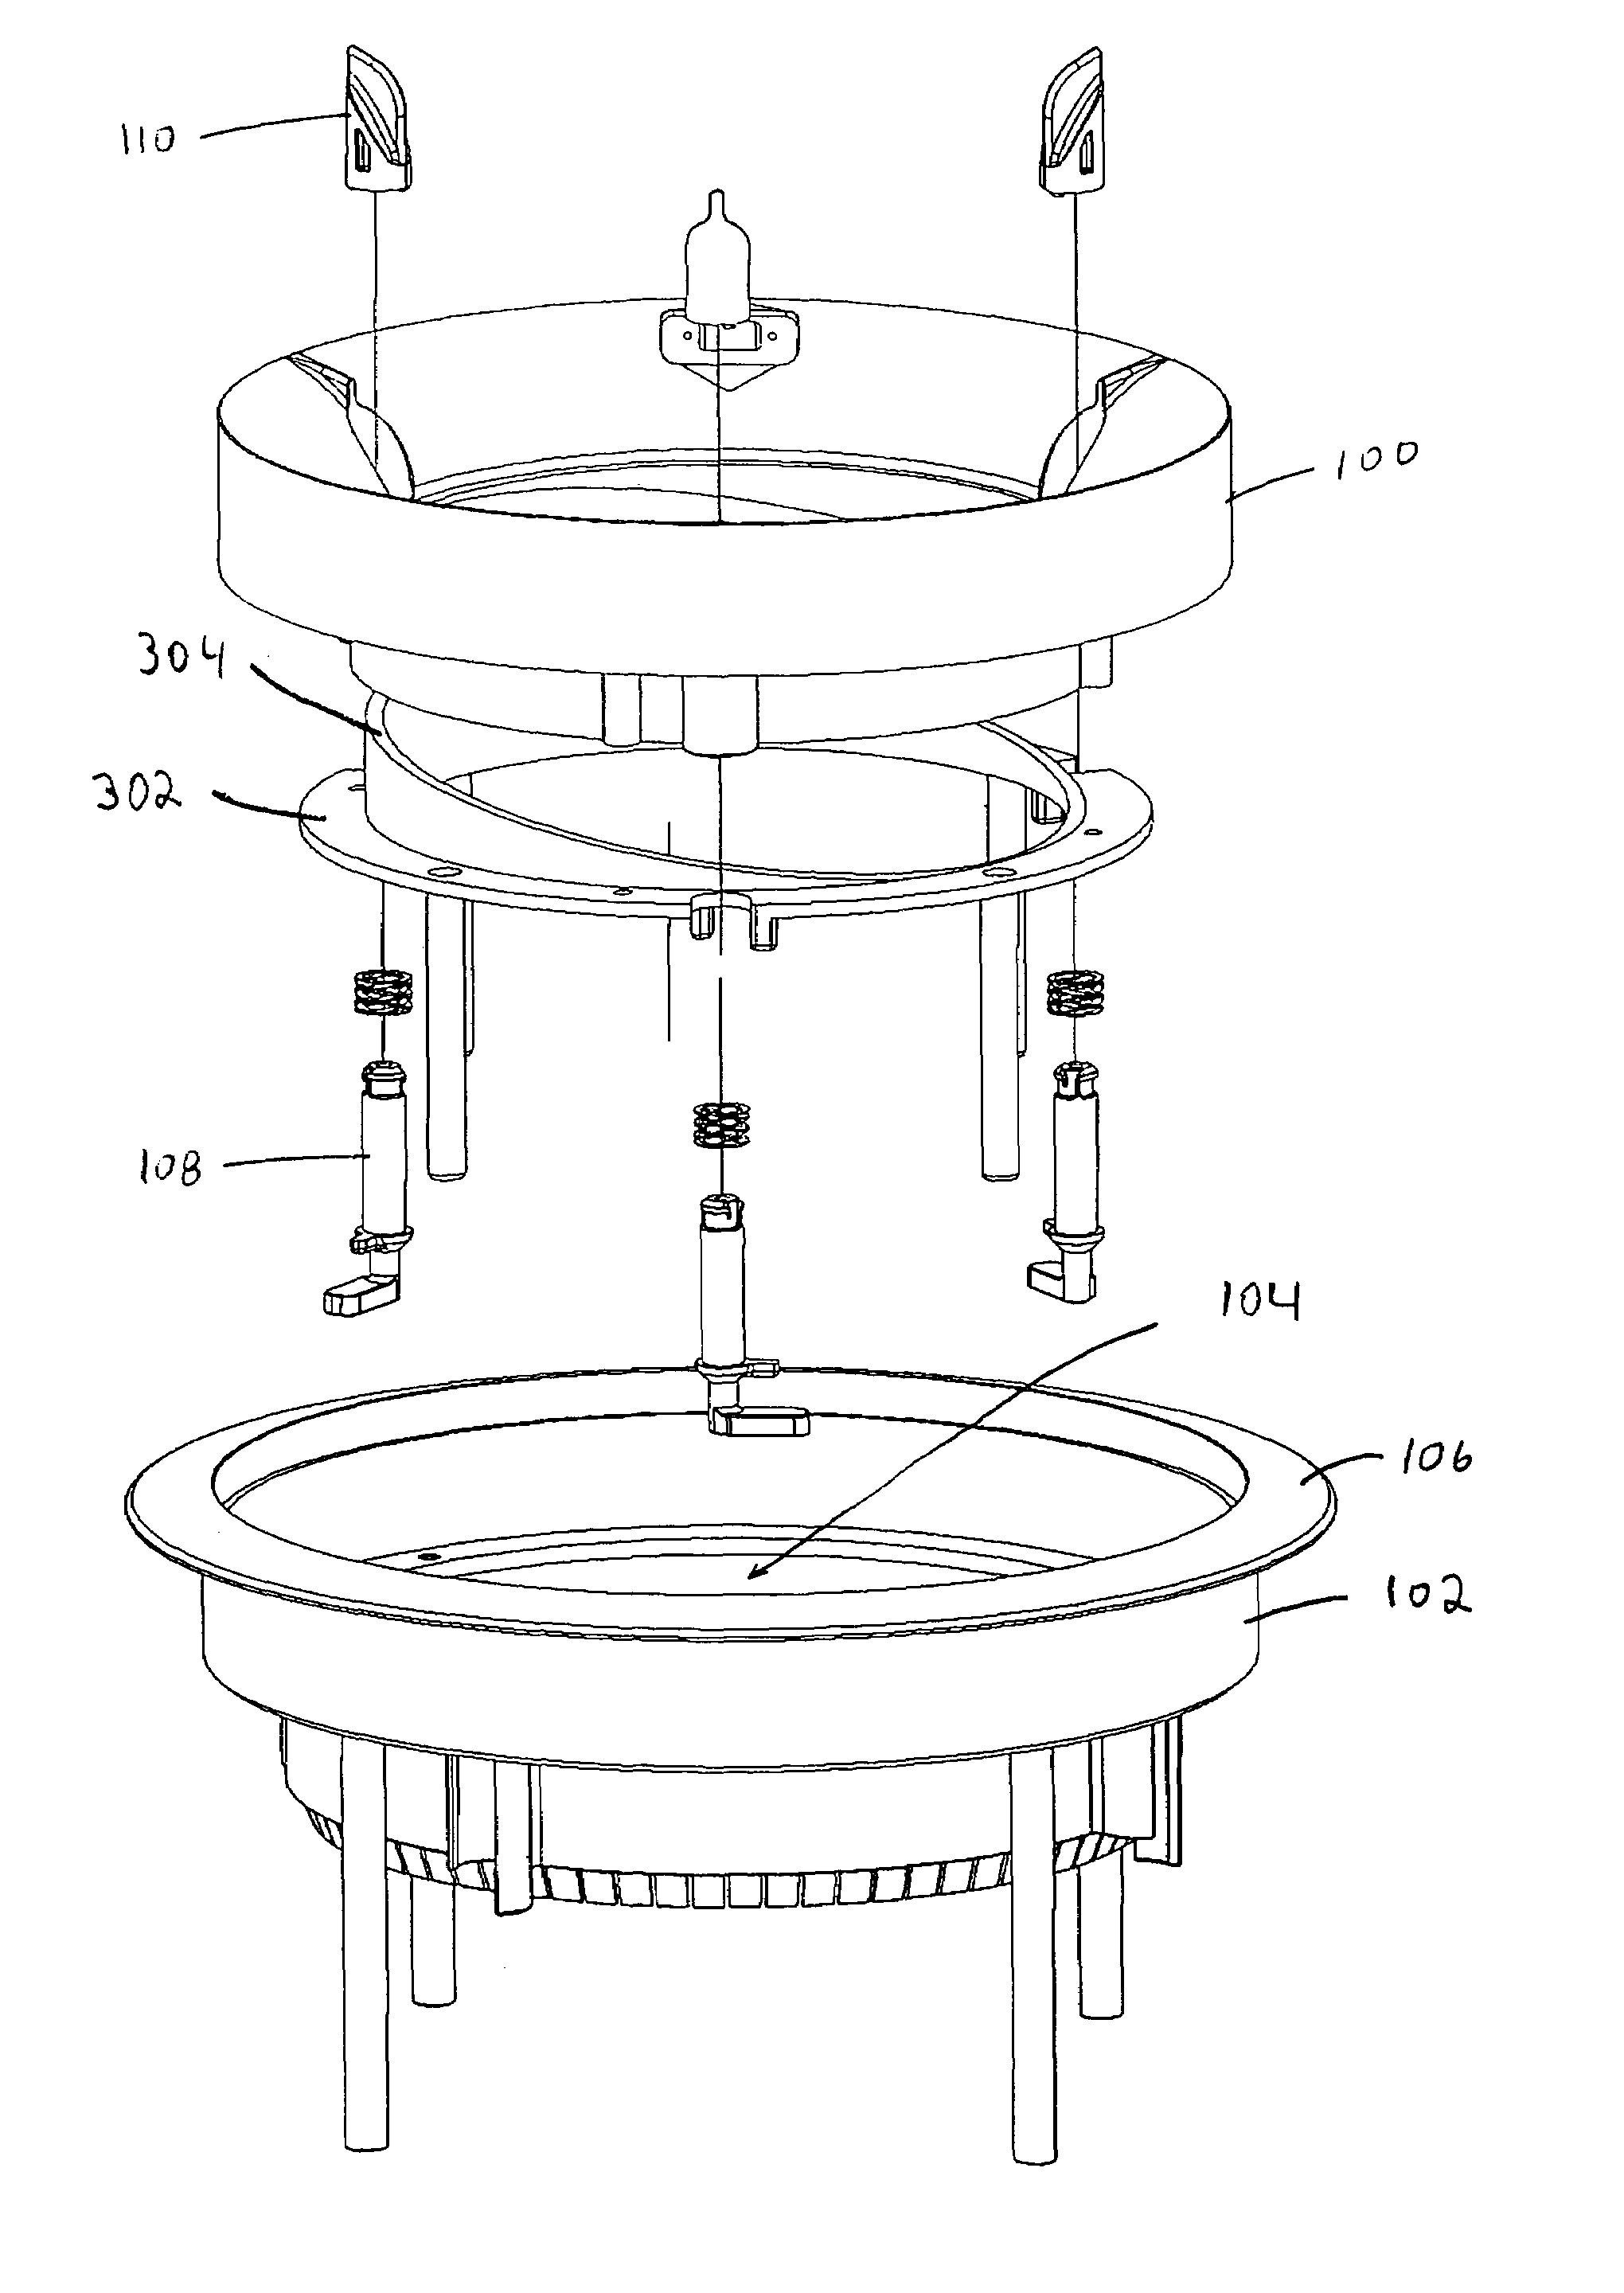 Snap-in and lock baffle